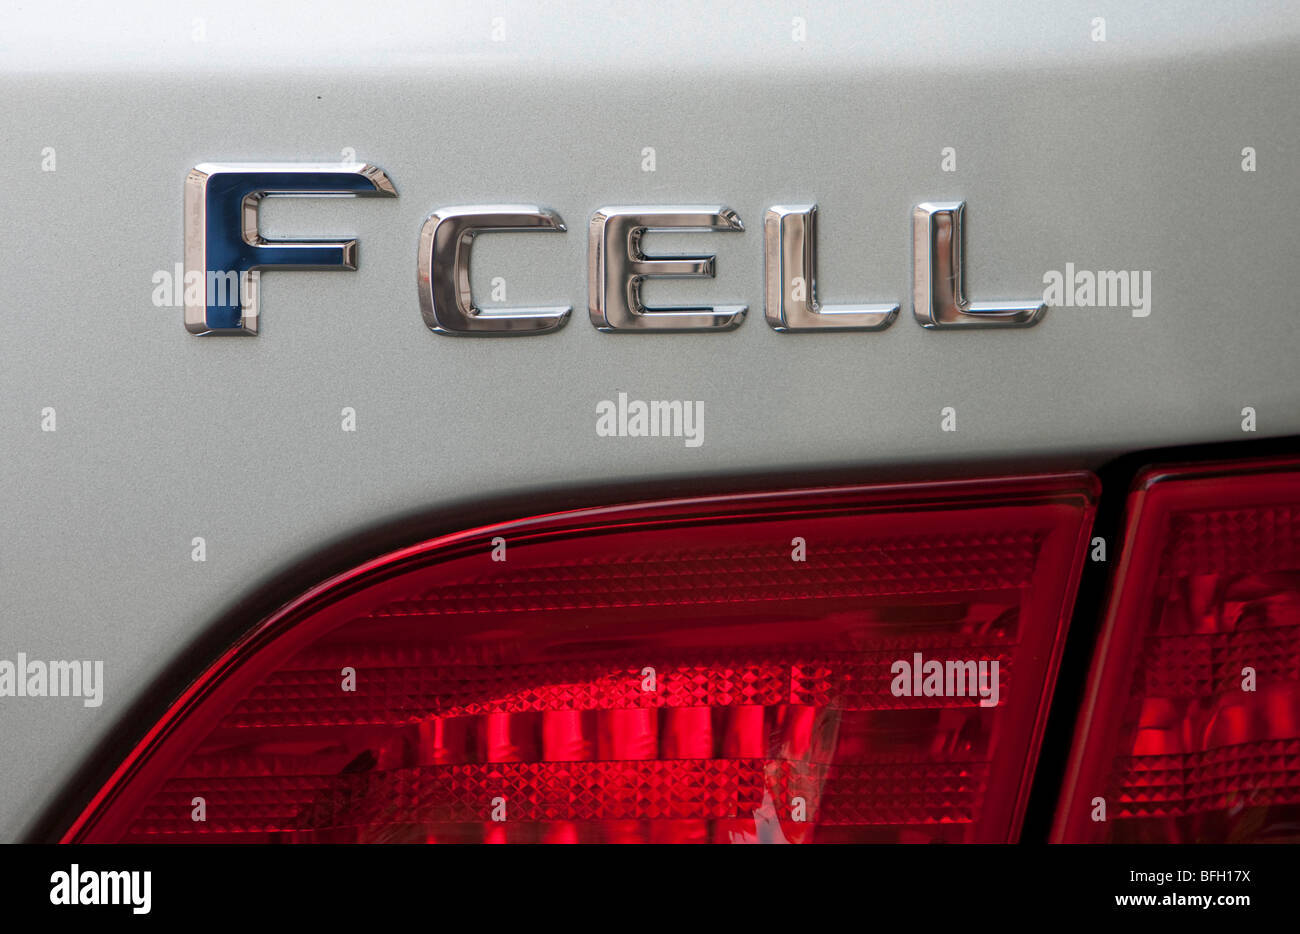 Mercedes B-class , hydrogen fuel cell vehicle | Stock Photo